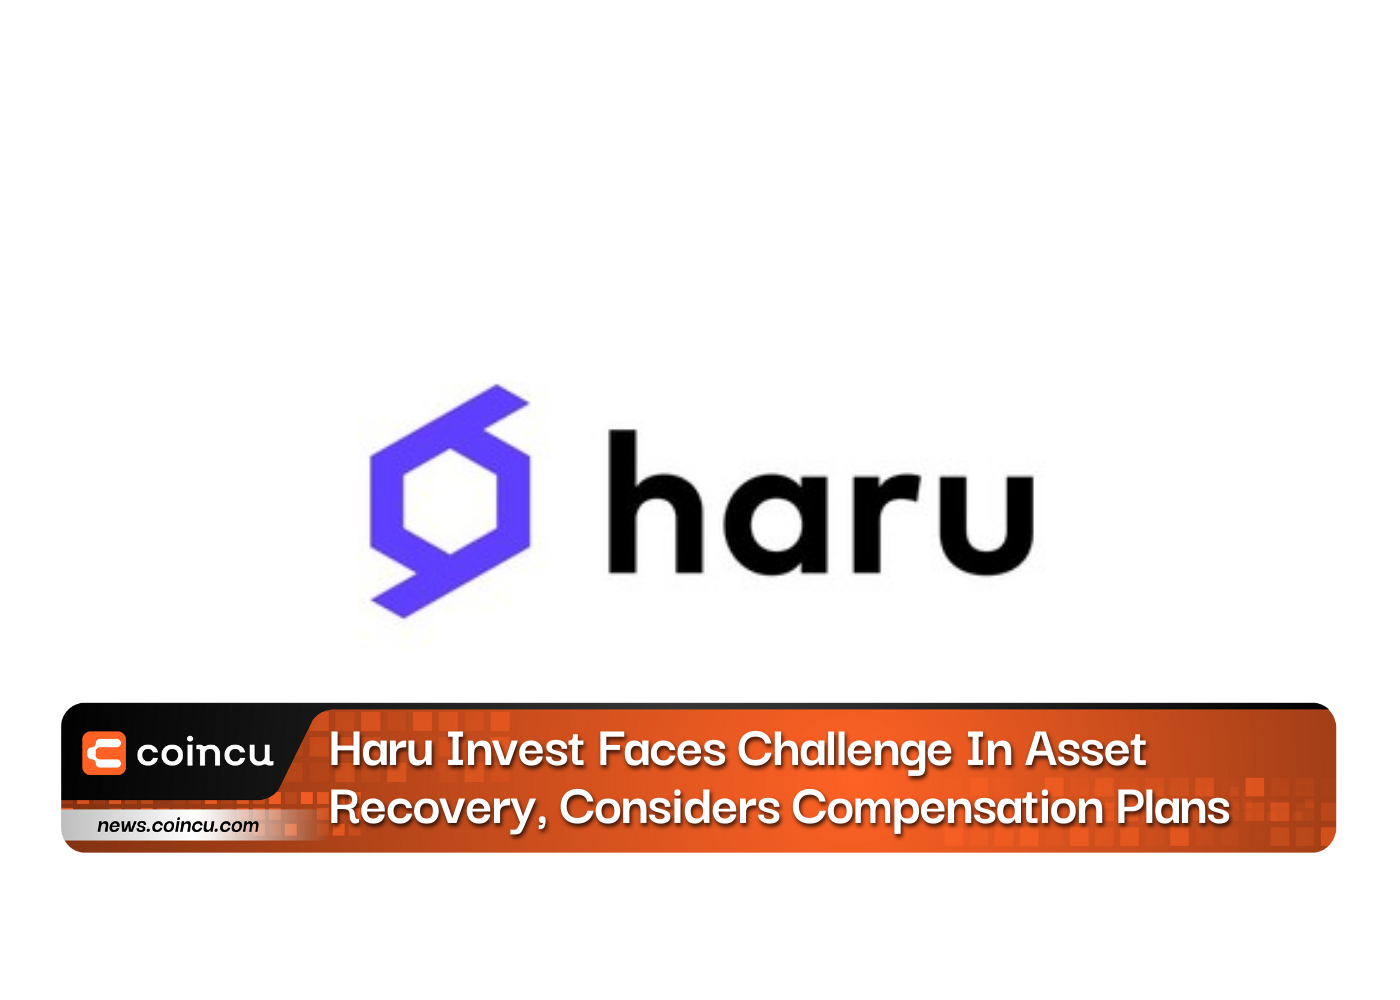 Haru Invest Faces Challenge In Asset Recovery, Considers Compensation Plans